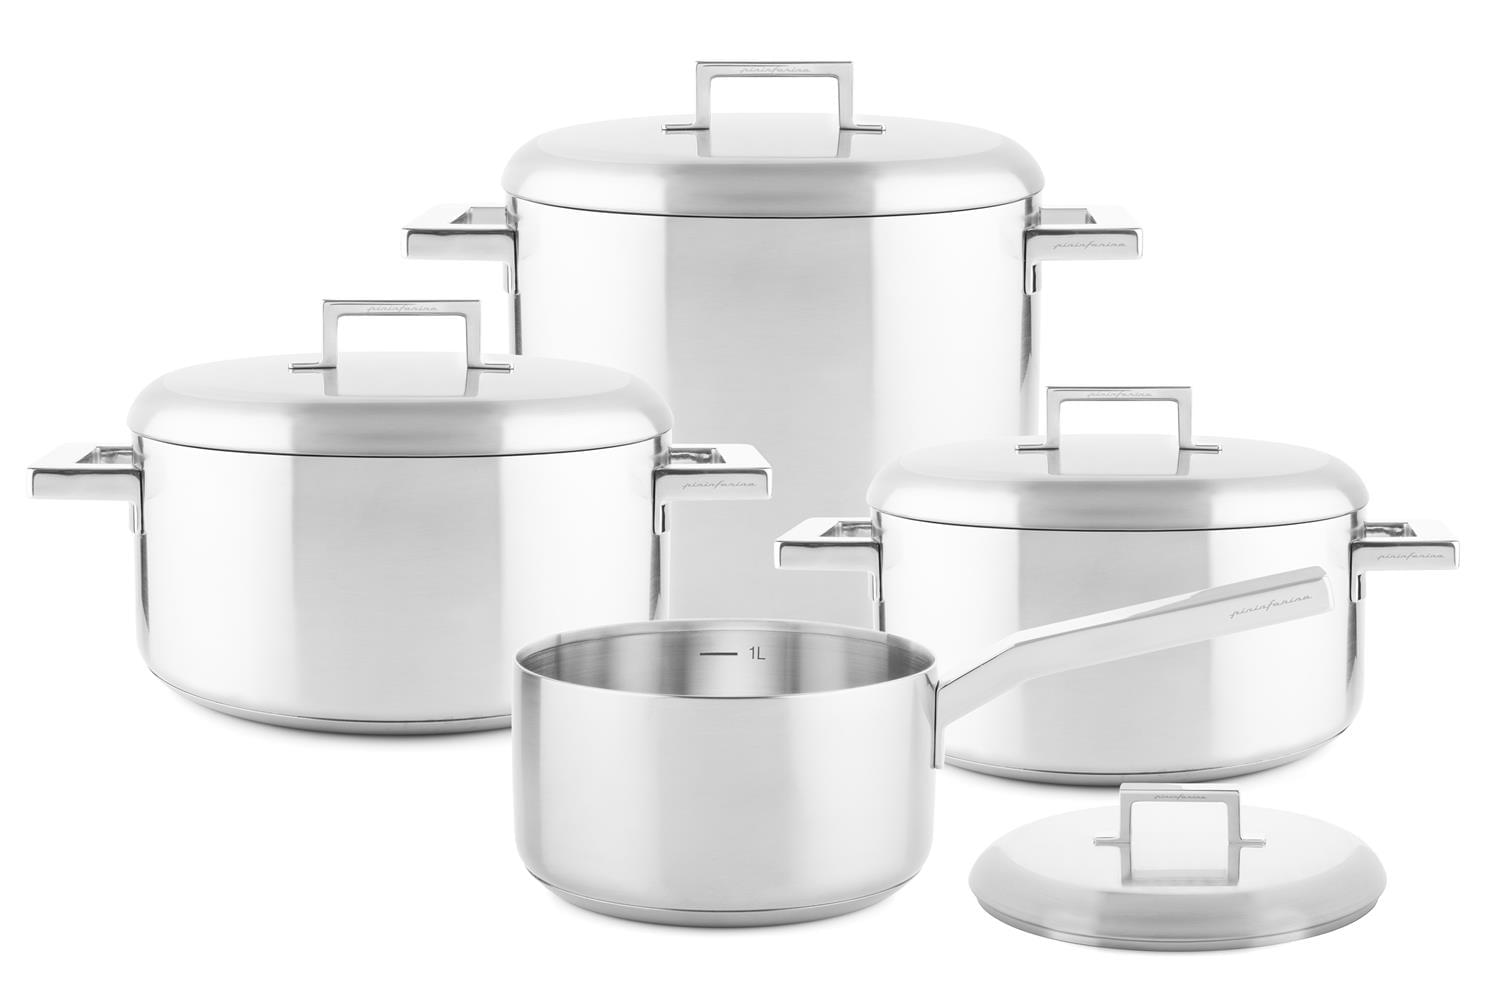 Set of stainless steel cookware for induction Stile line by Pininfarina, 8 pieces